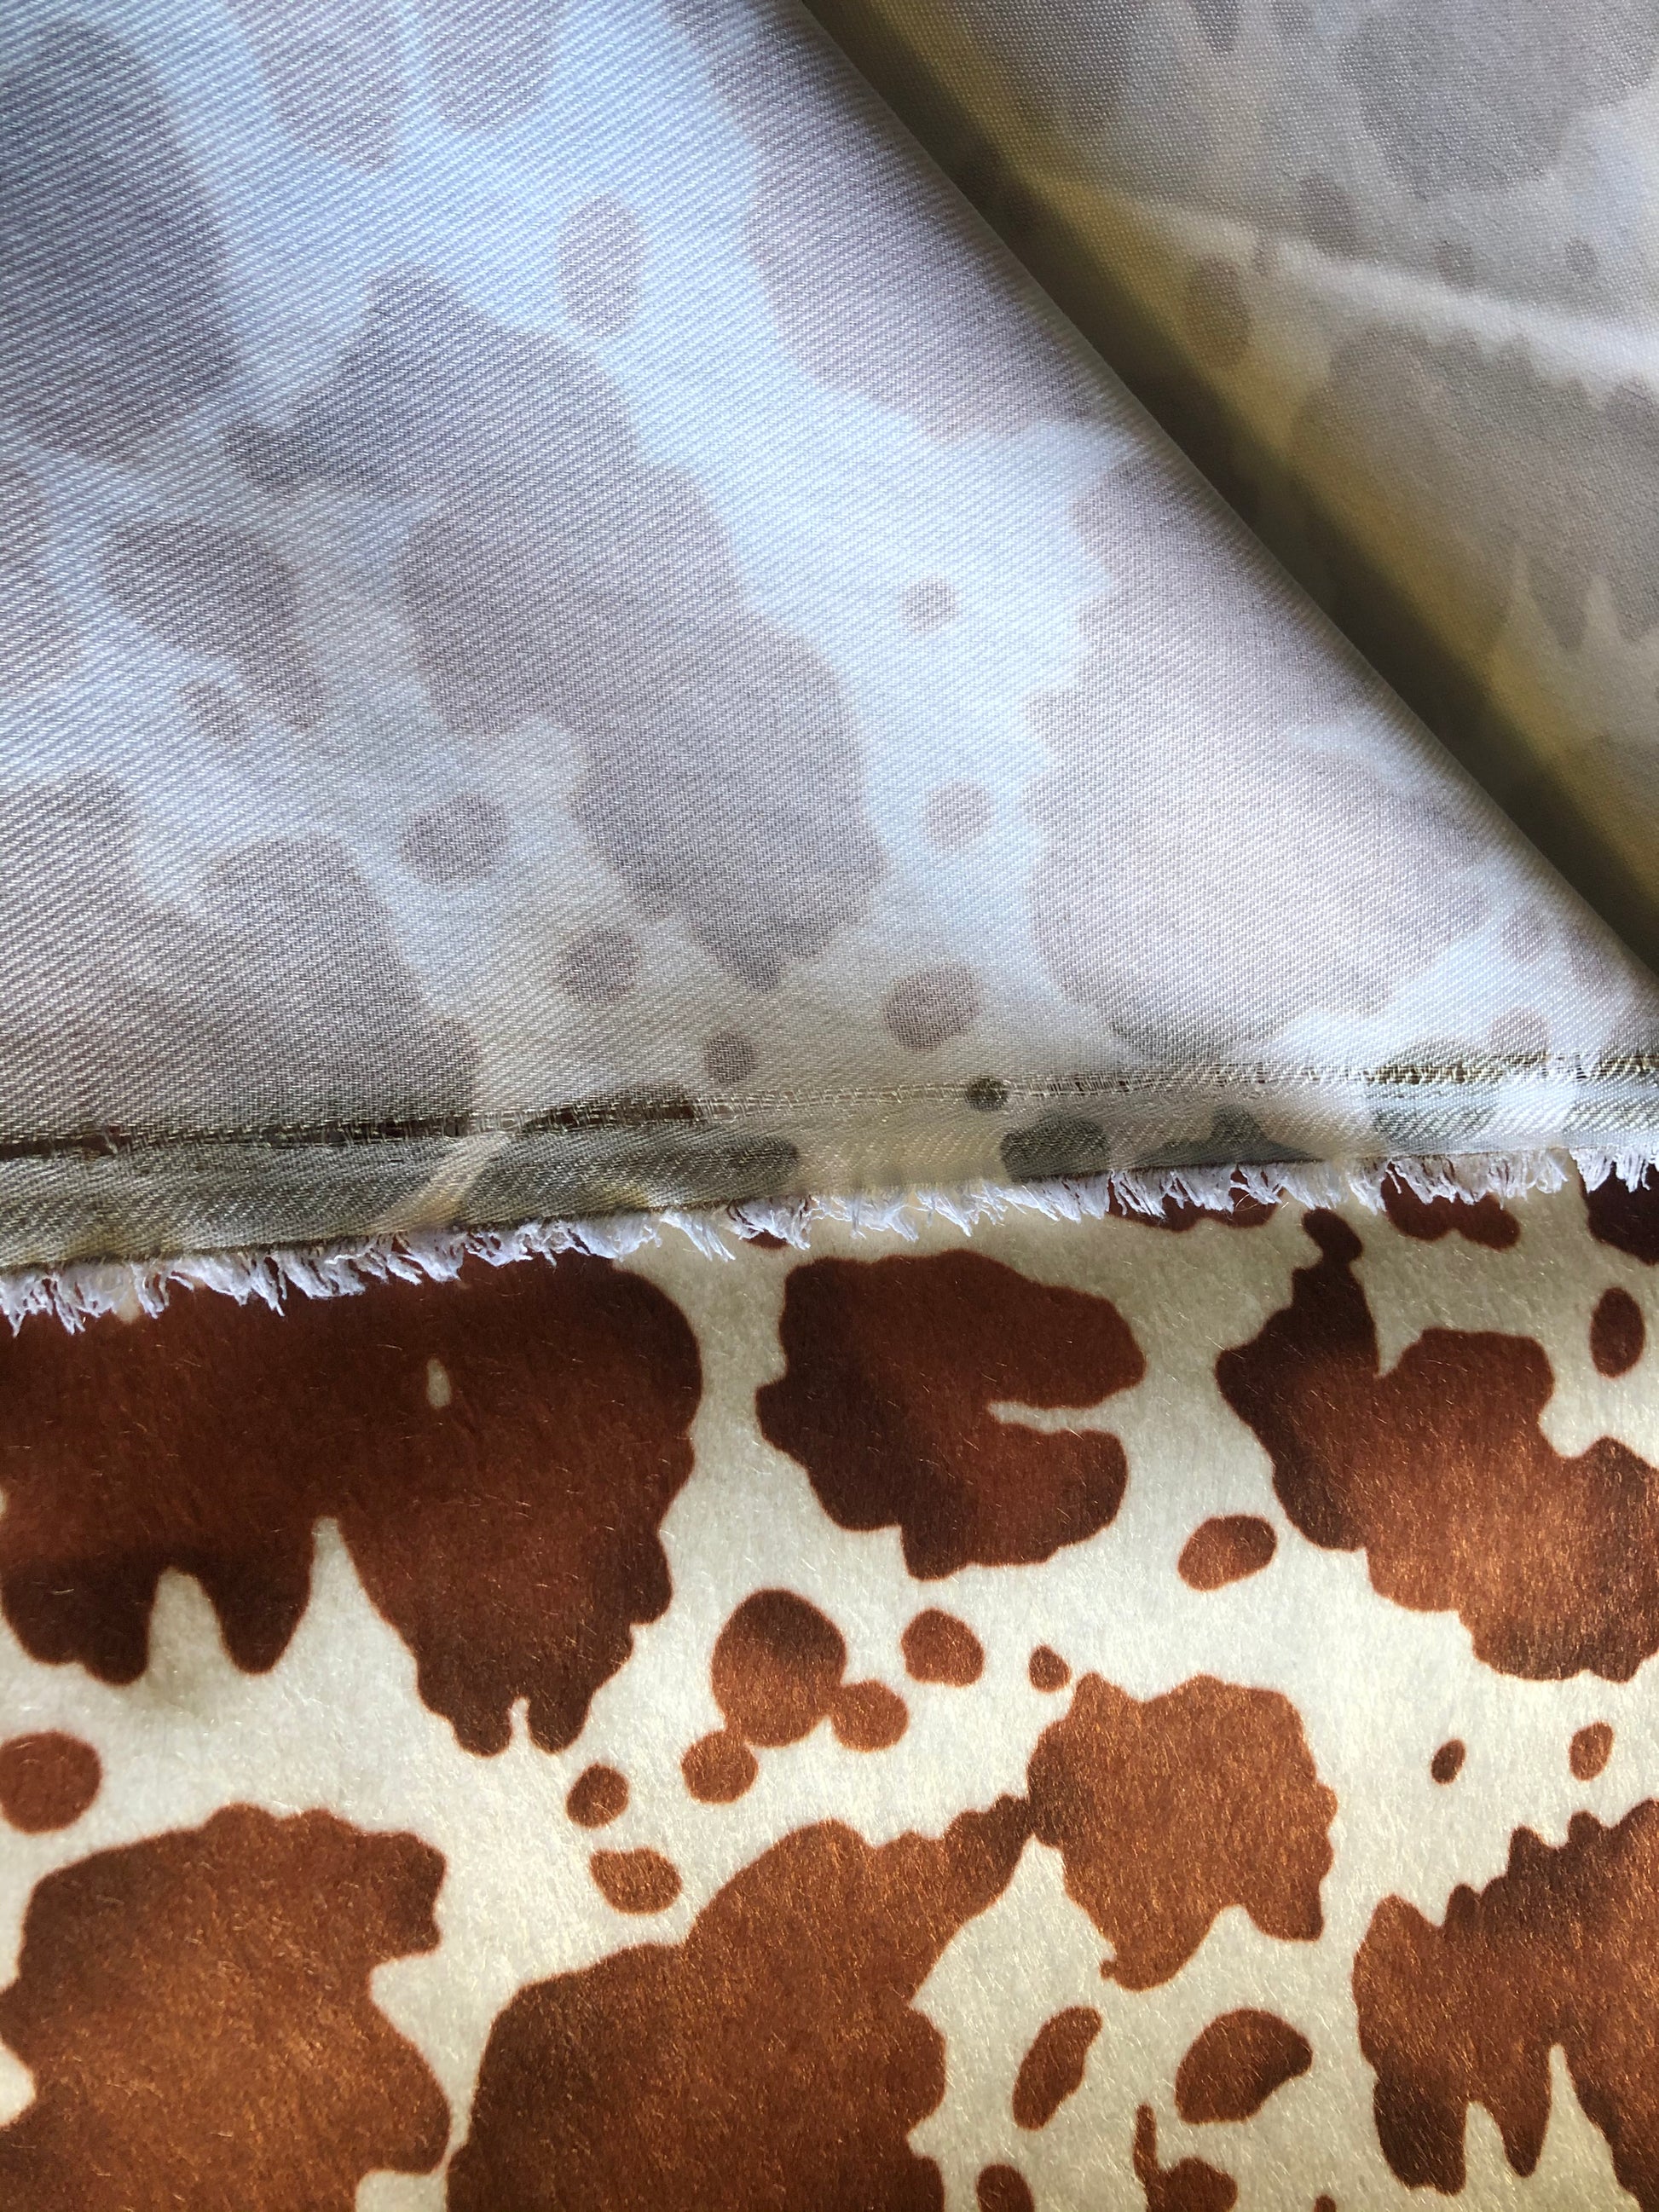 Ferdinand-Milk - A faux leather cow hide fabric from Chameleon